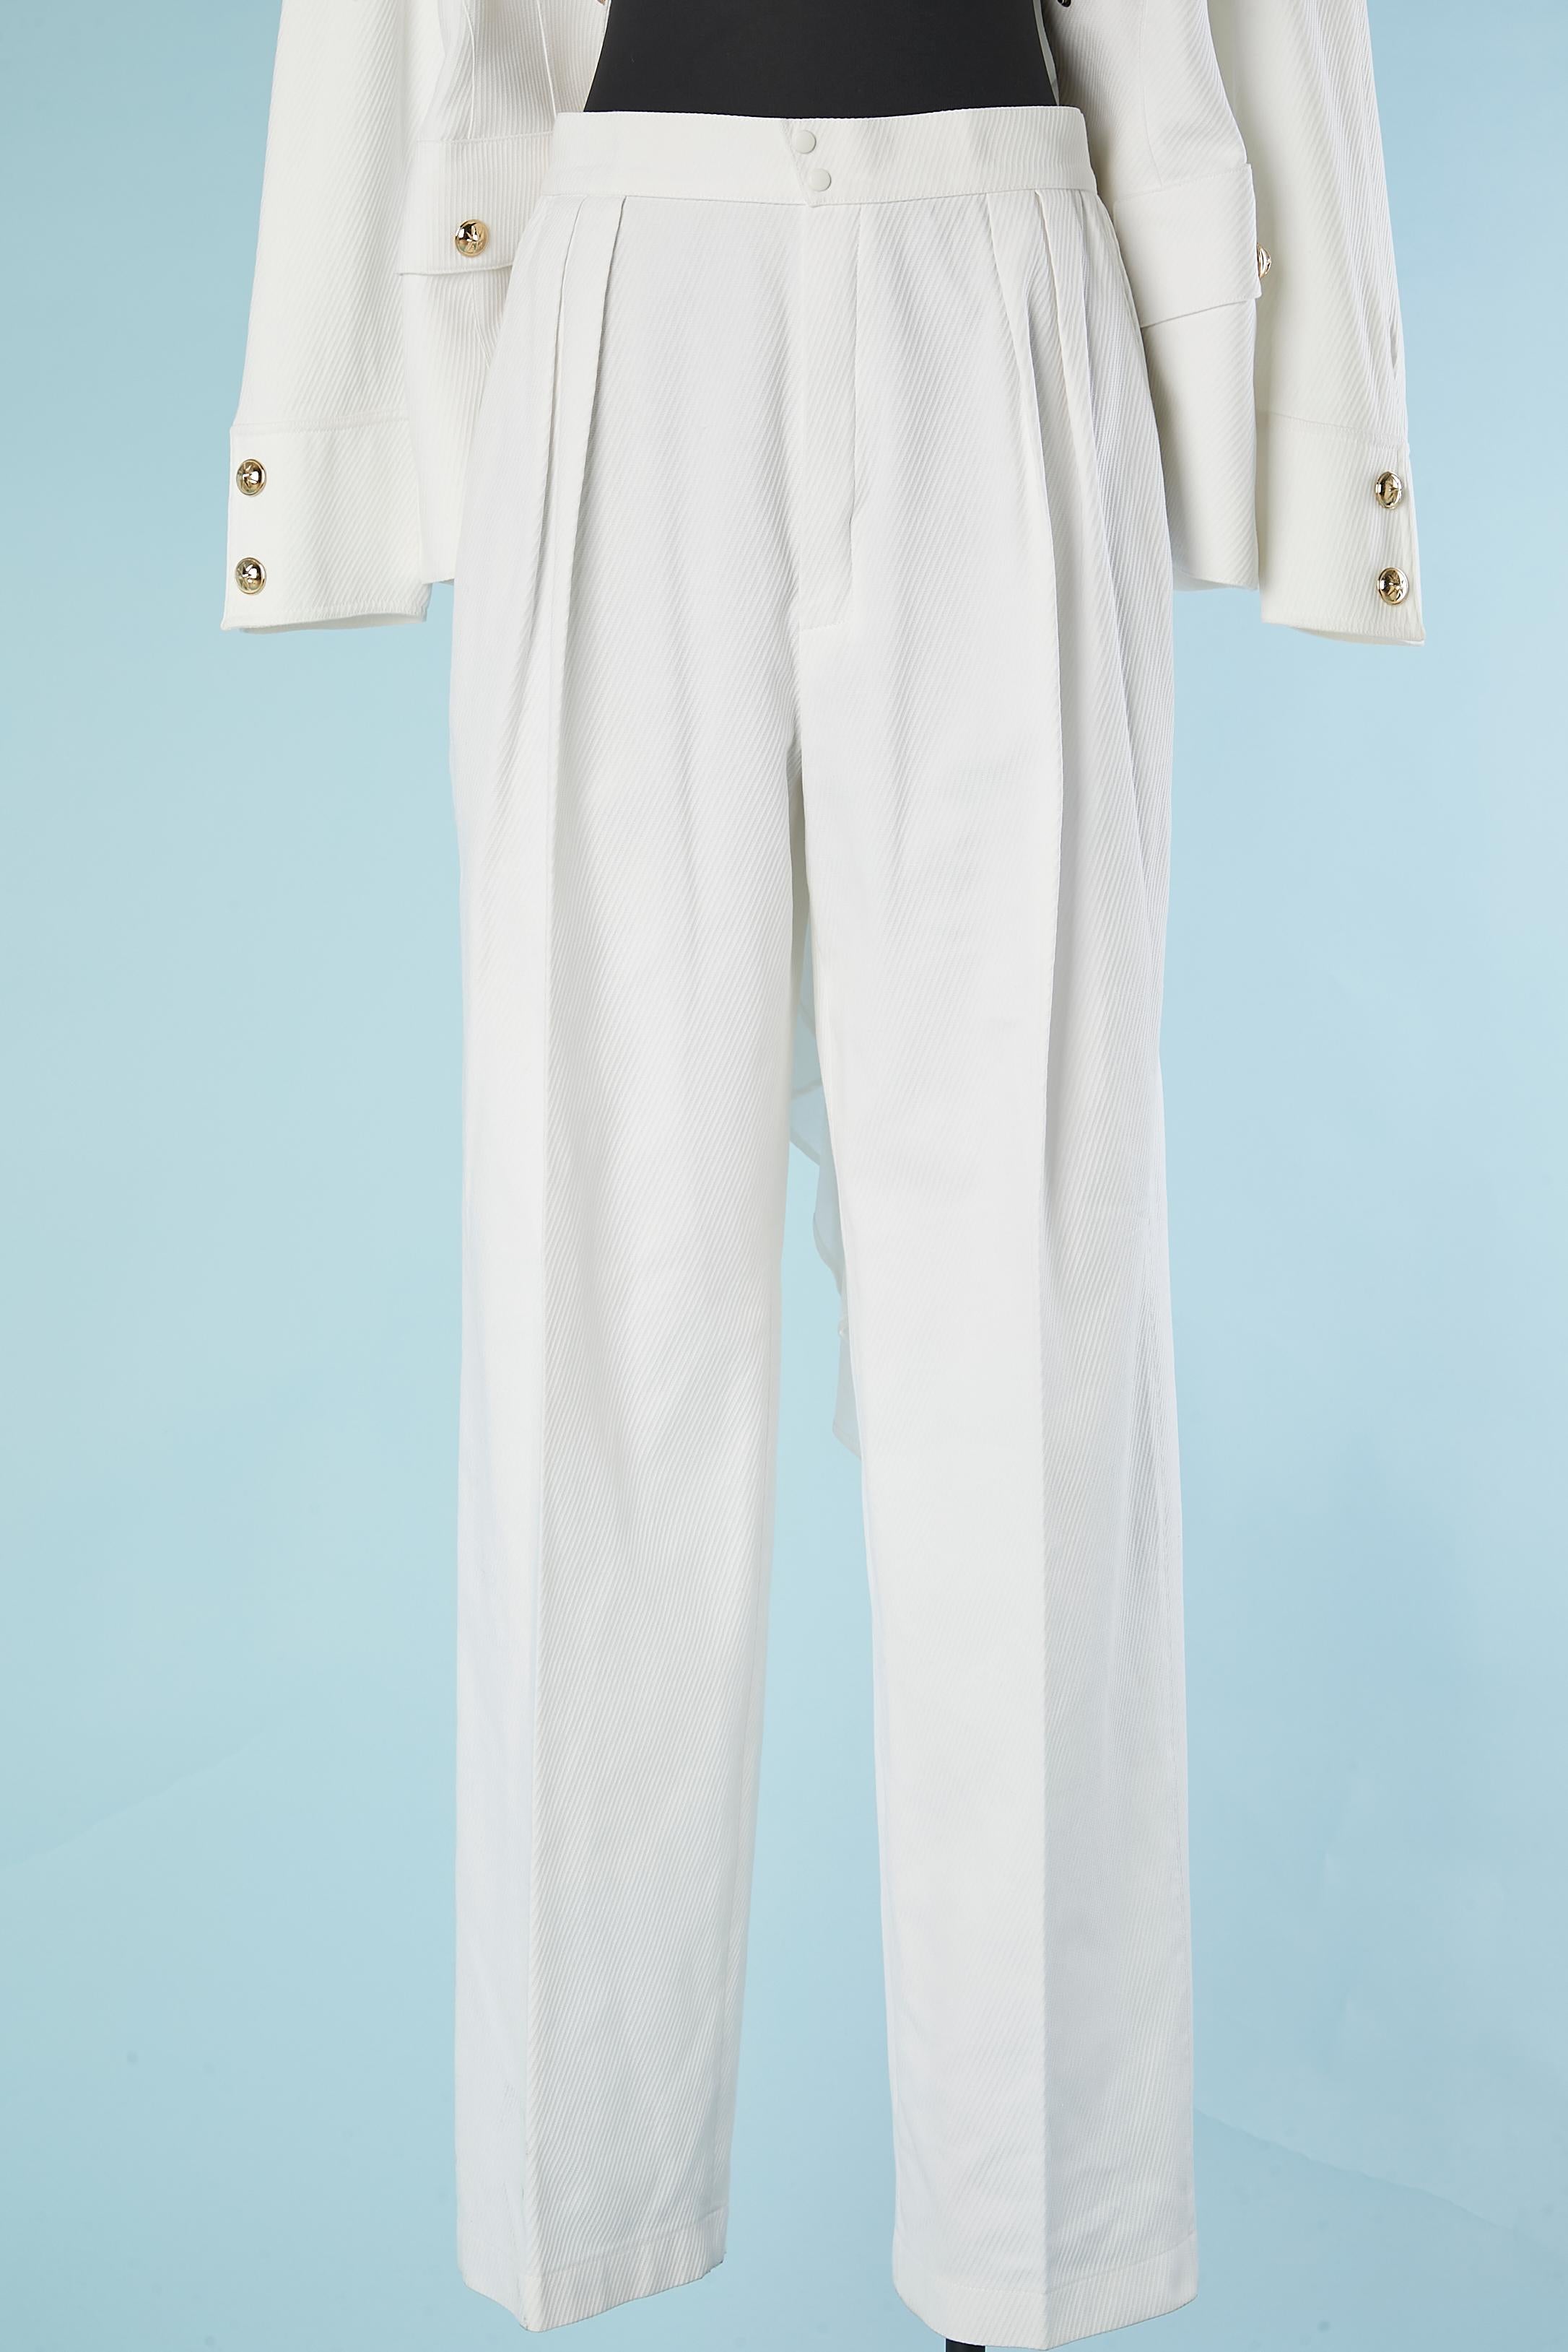 Backless white cotton trouser-suit with gold metal star snap Thierry Mugler  7